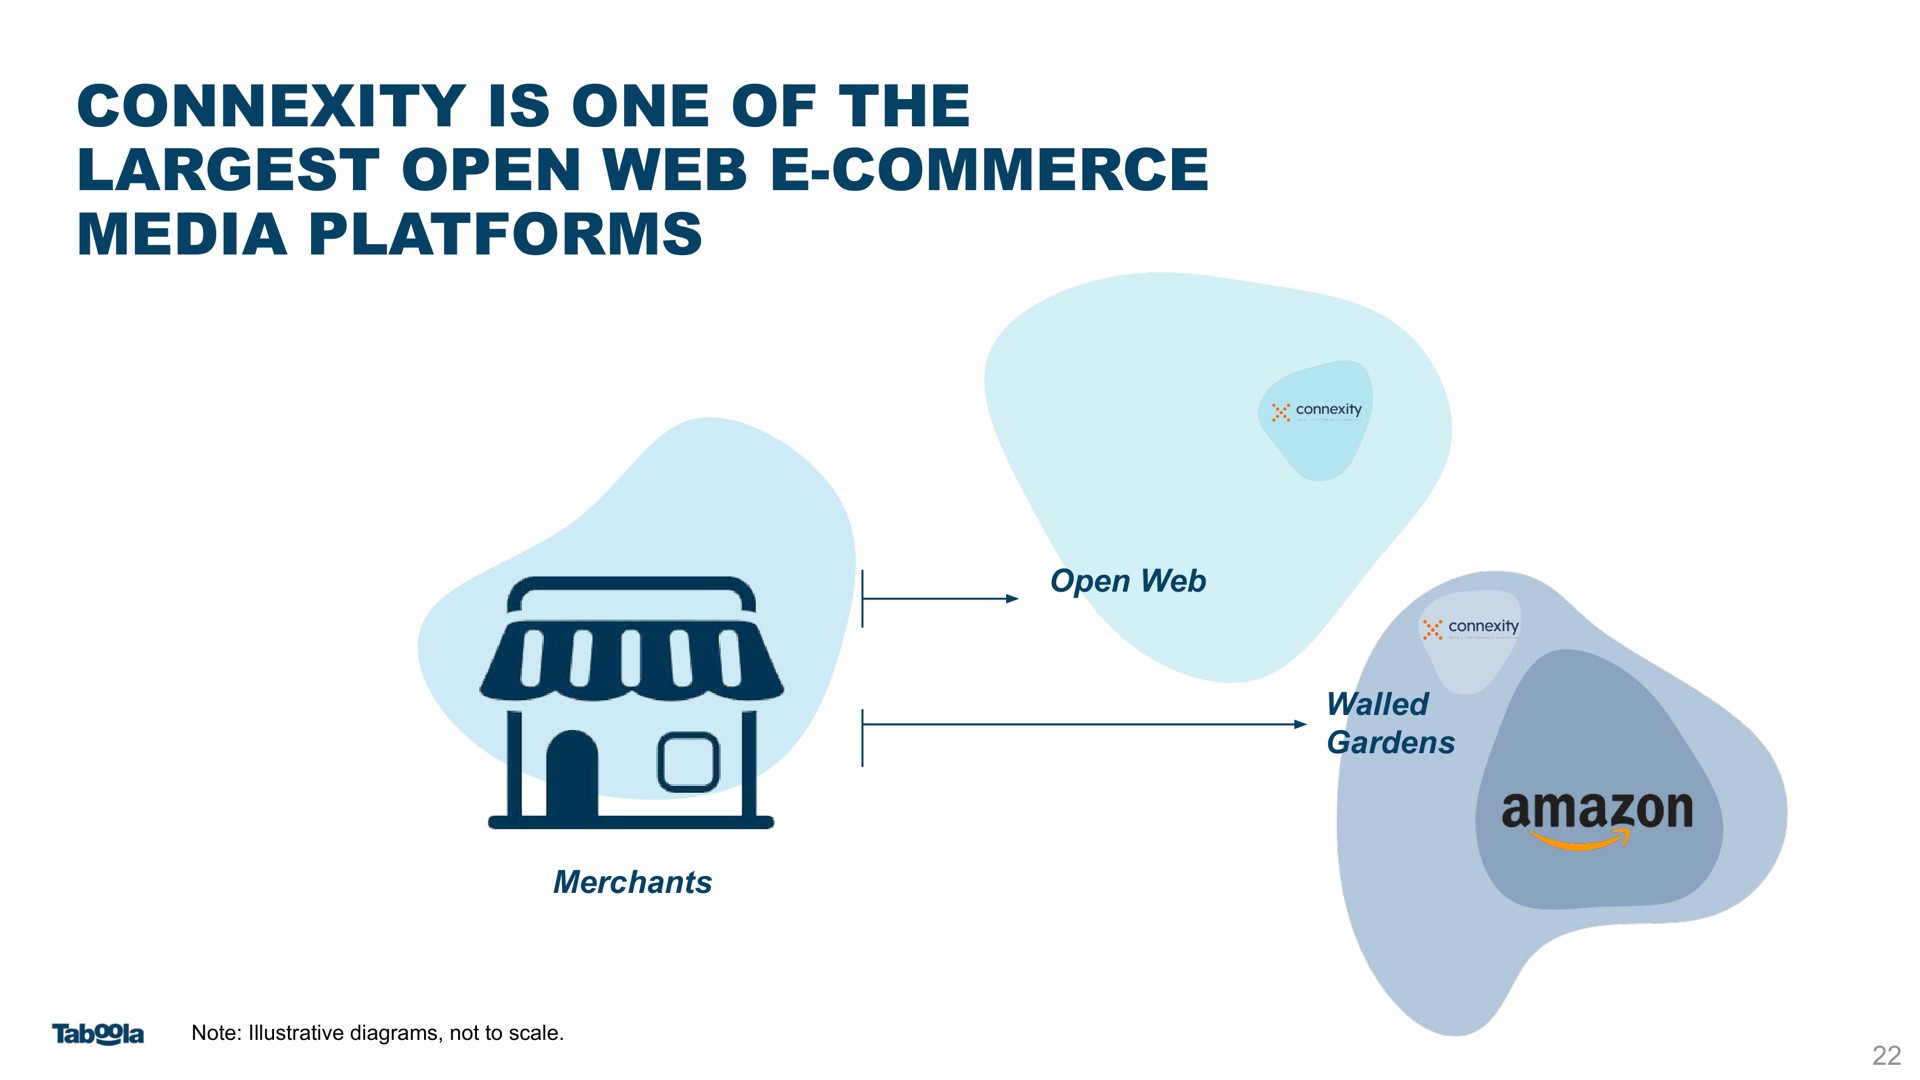 connexity is one of the open web commerce media platforms | Taboola